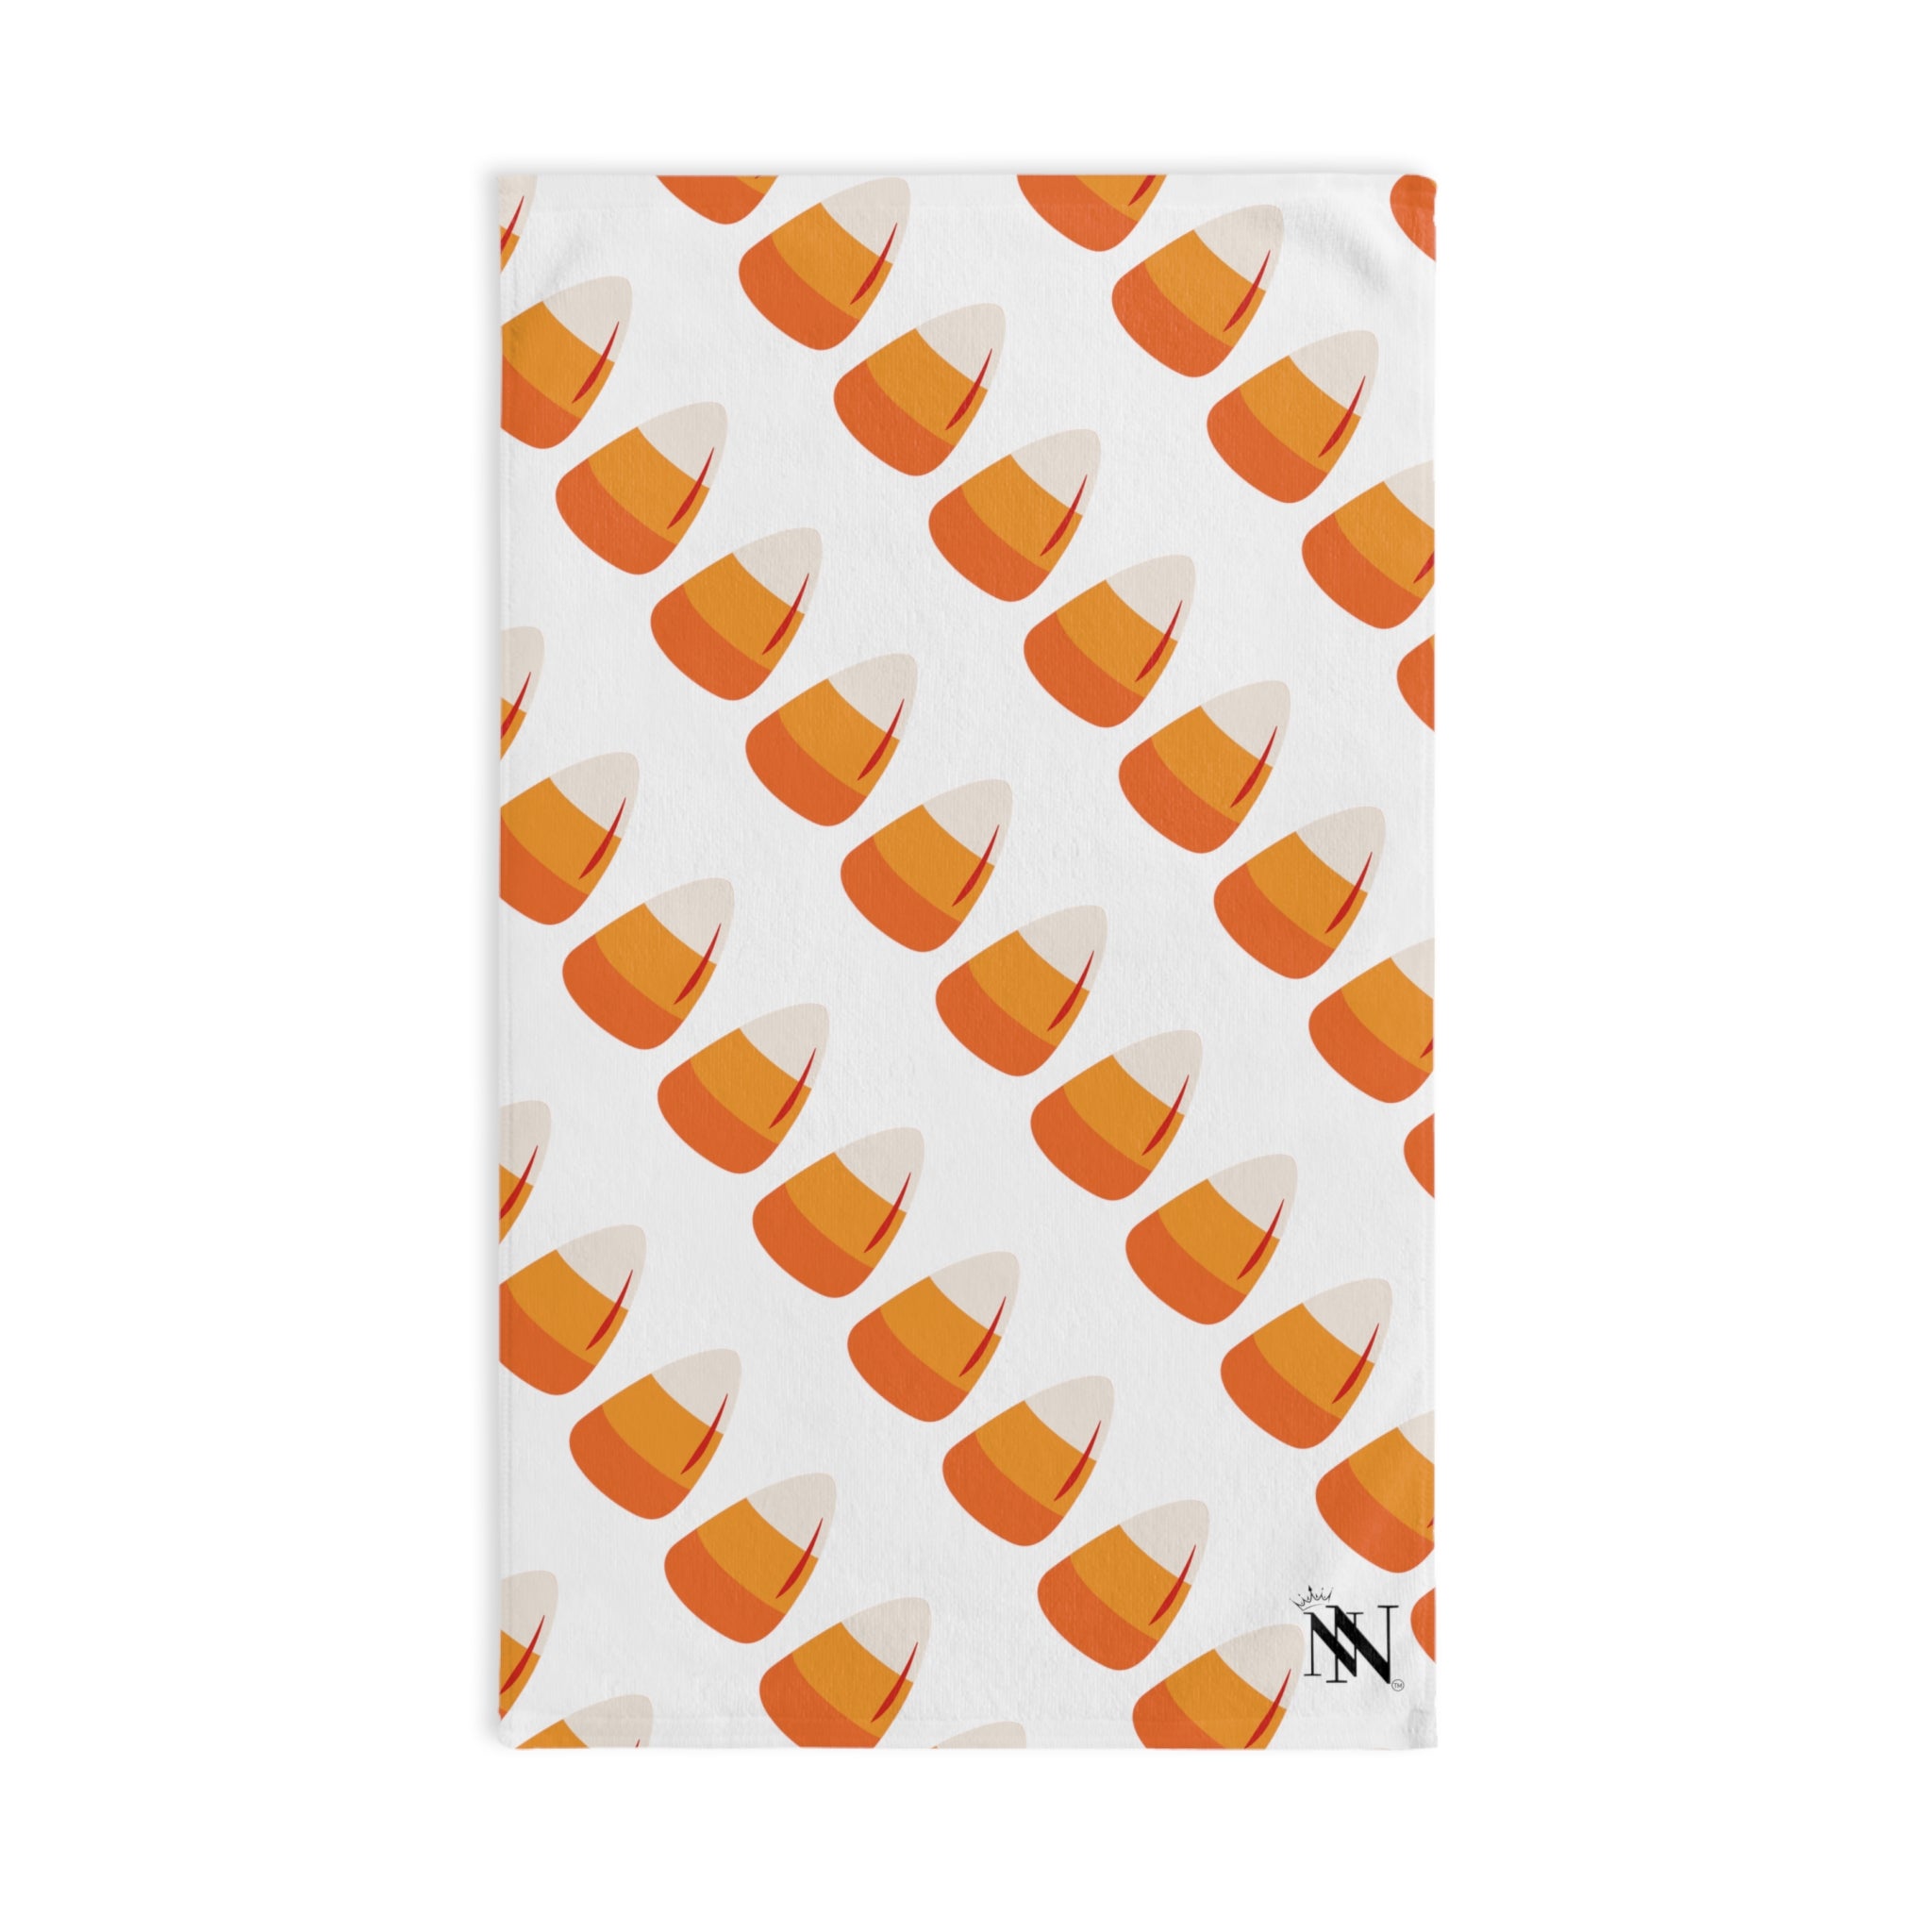 Candy Corn White | Funny Gifts for Men - Gifts for Him - Birthday Gifts for Men, Him, Her, Husband, Boyfriend, Girlfriend, New Couple Gifts, Fathers & Valentines Day Gifts, Christmas Gifts NECTAR NAPKINS